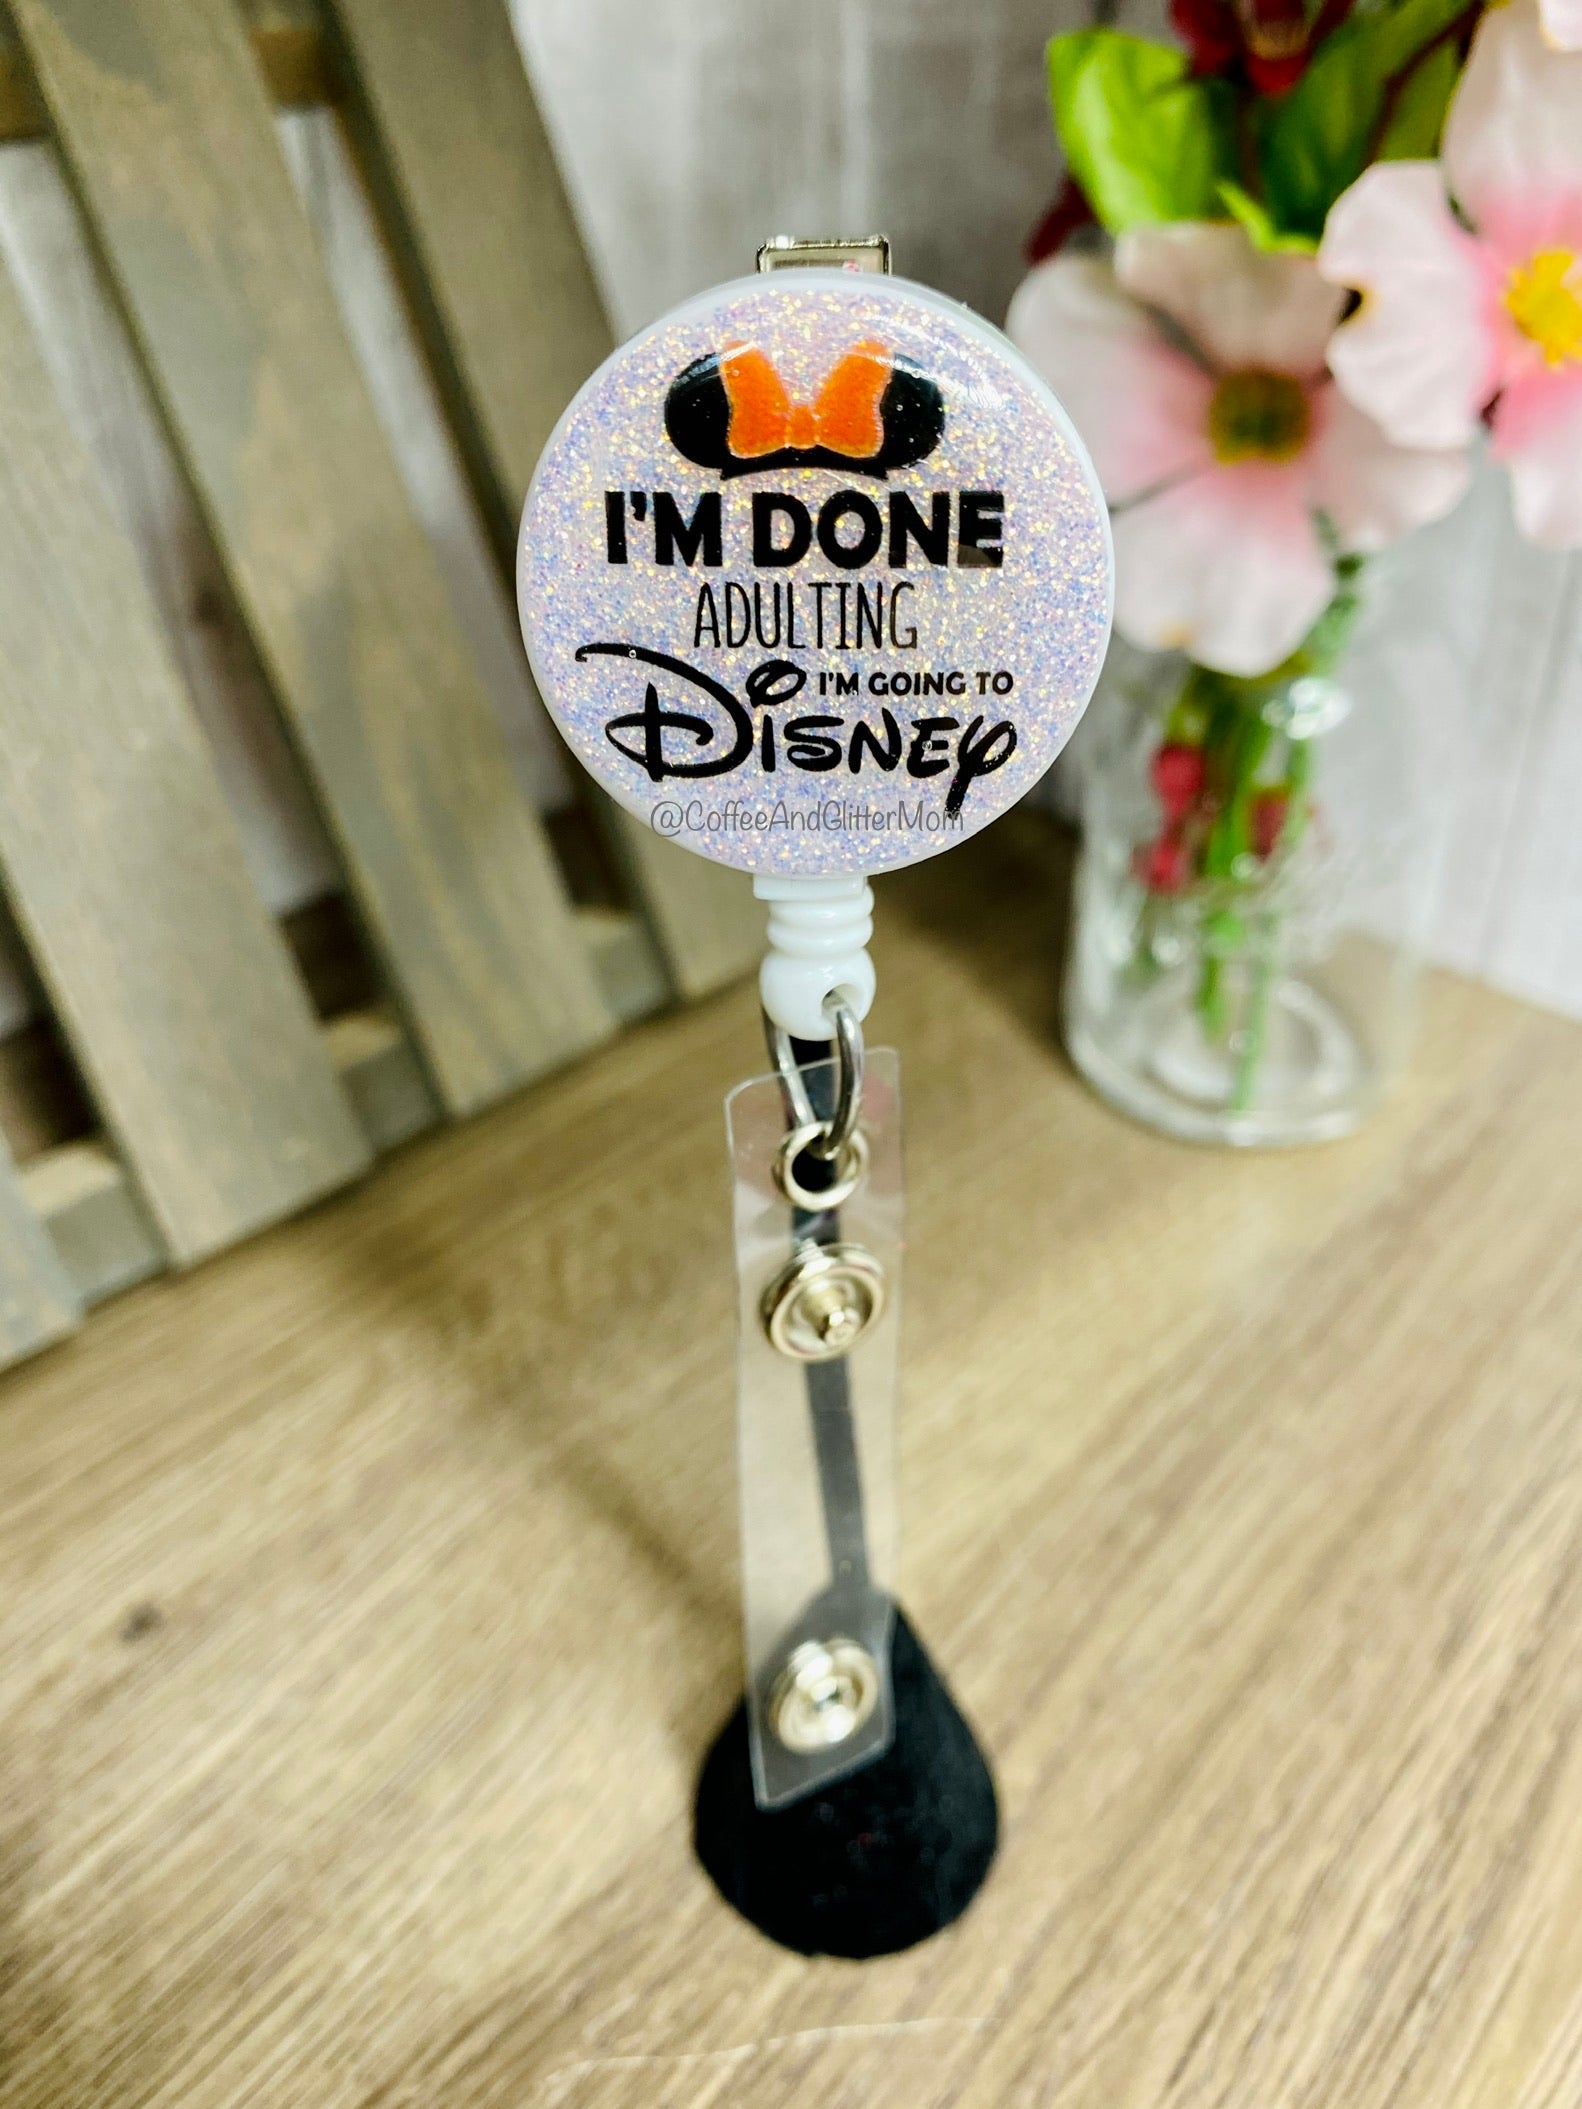 I'm Done Adulting, Going To Disney Badge Reel – Coffee And Glitter Mom